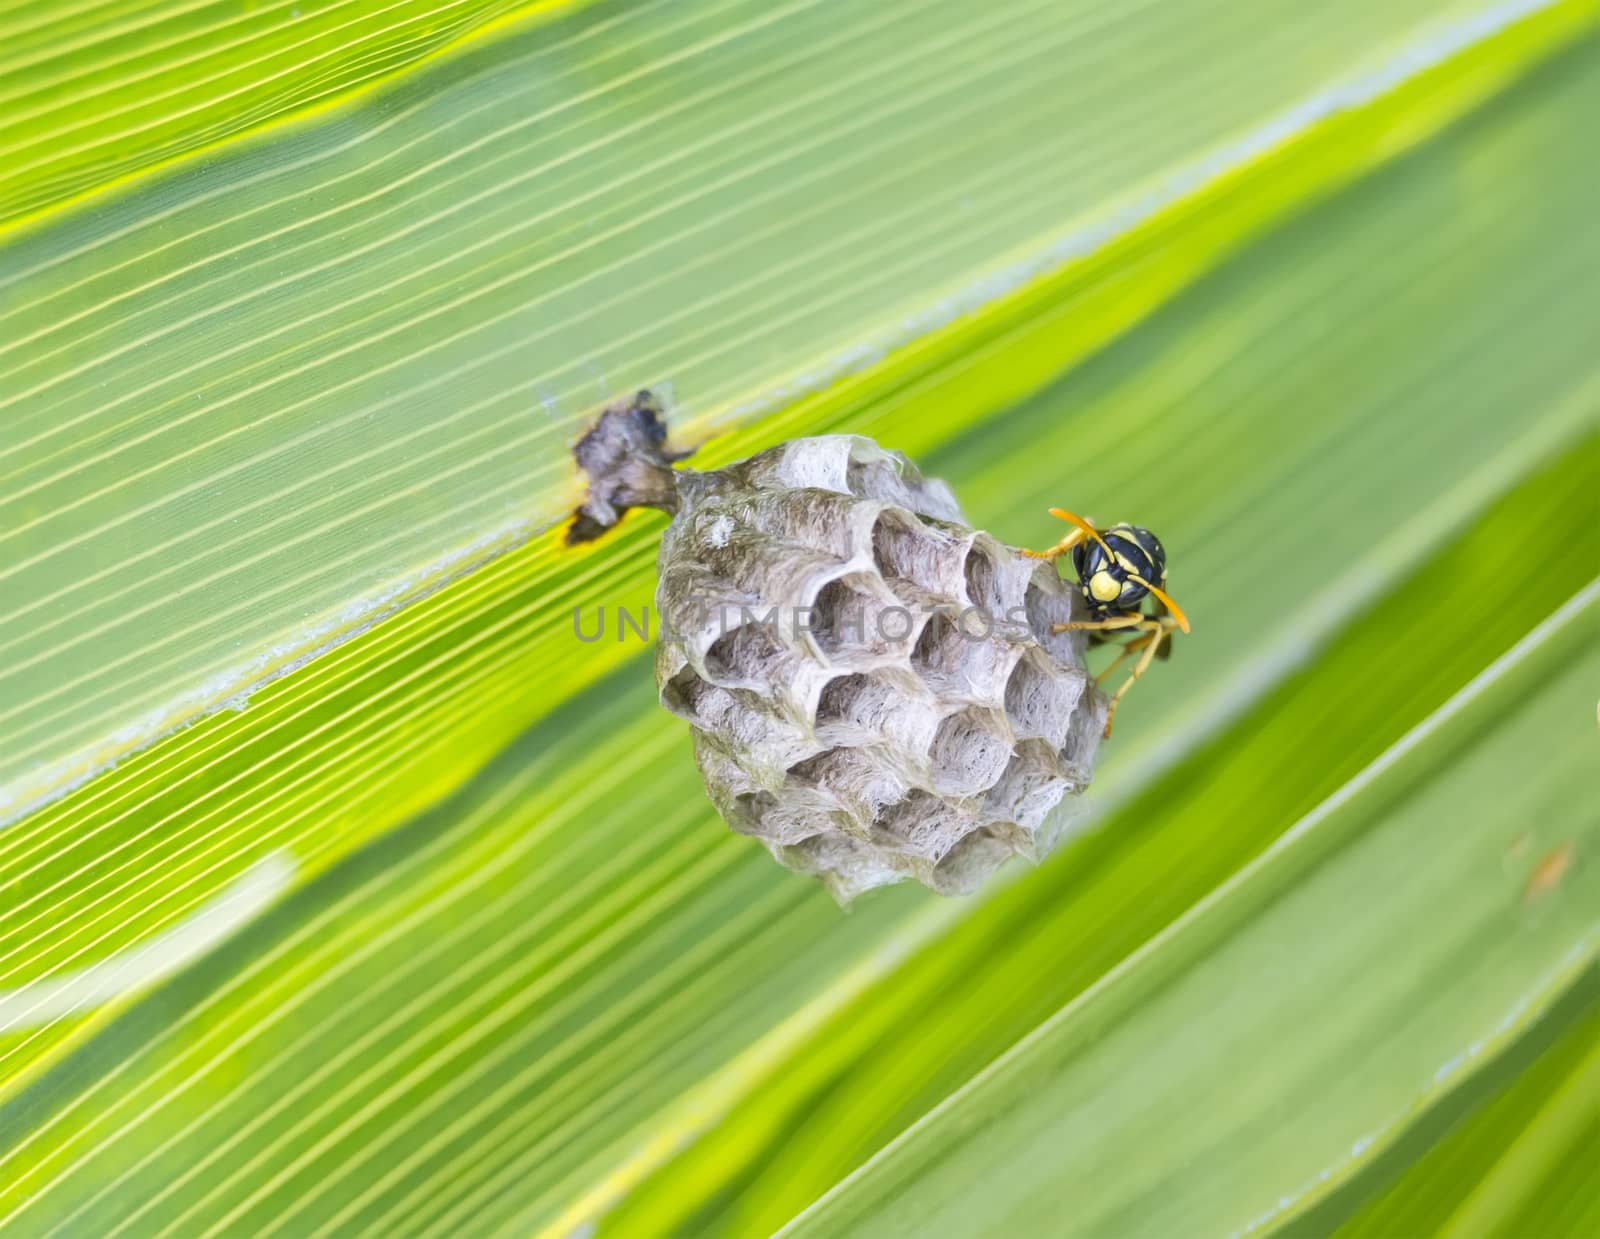 Wasp building a nest in a palm leaf